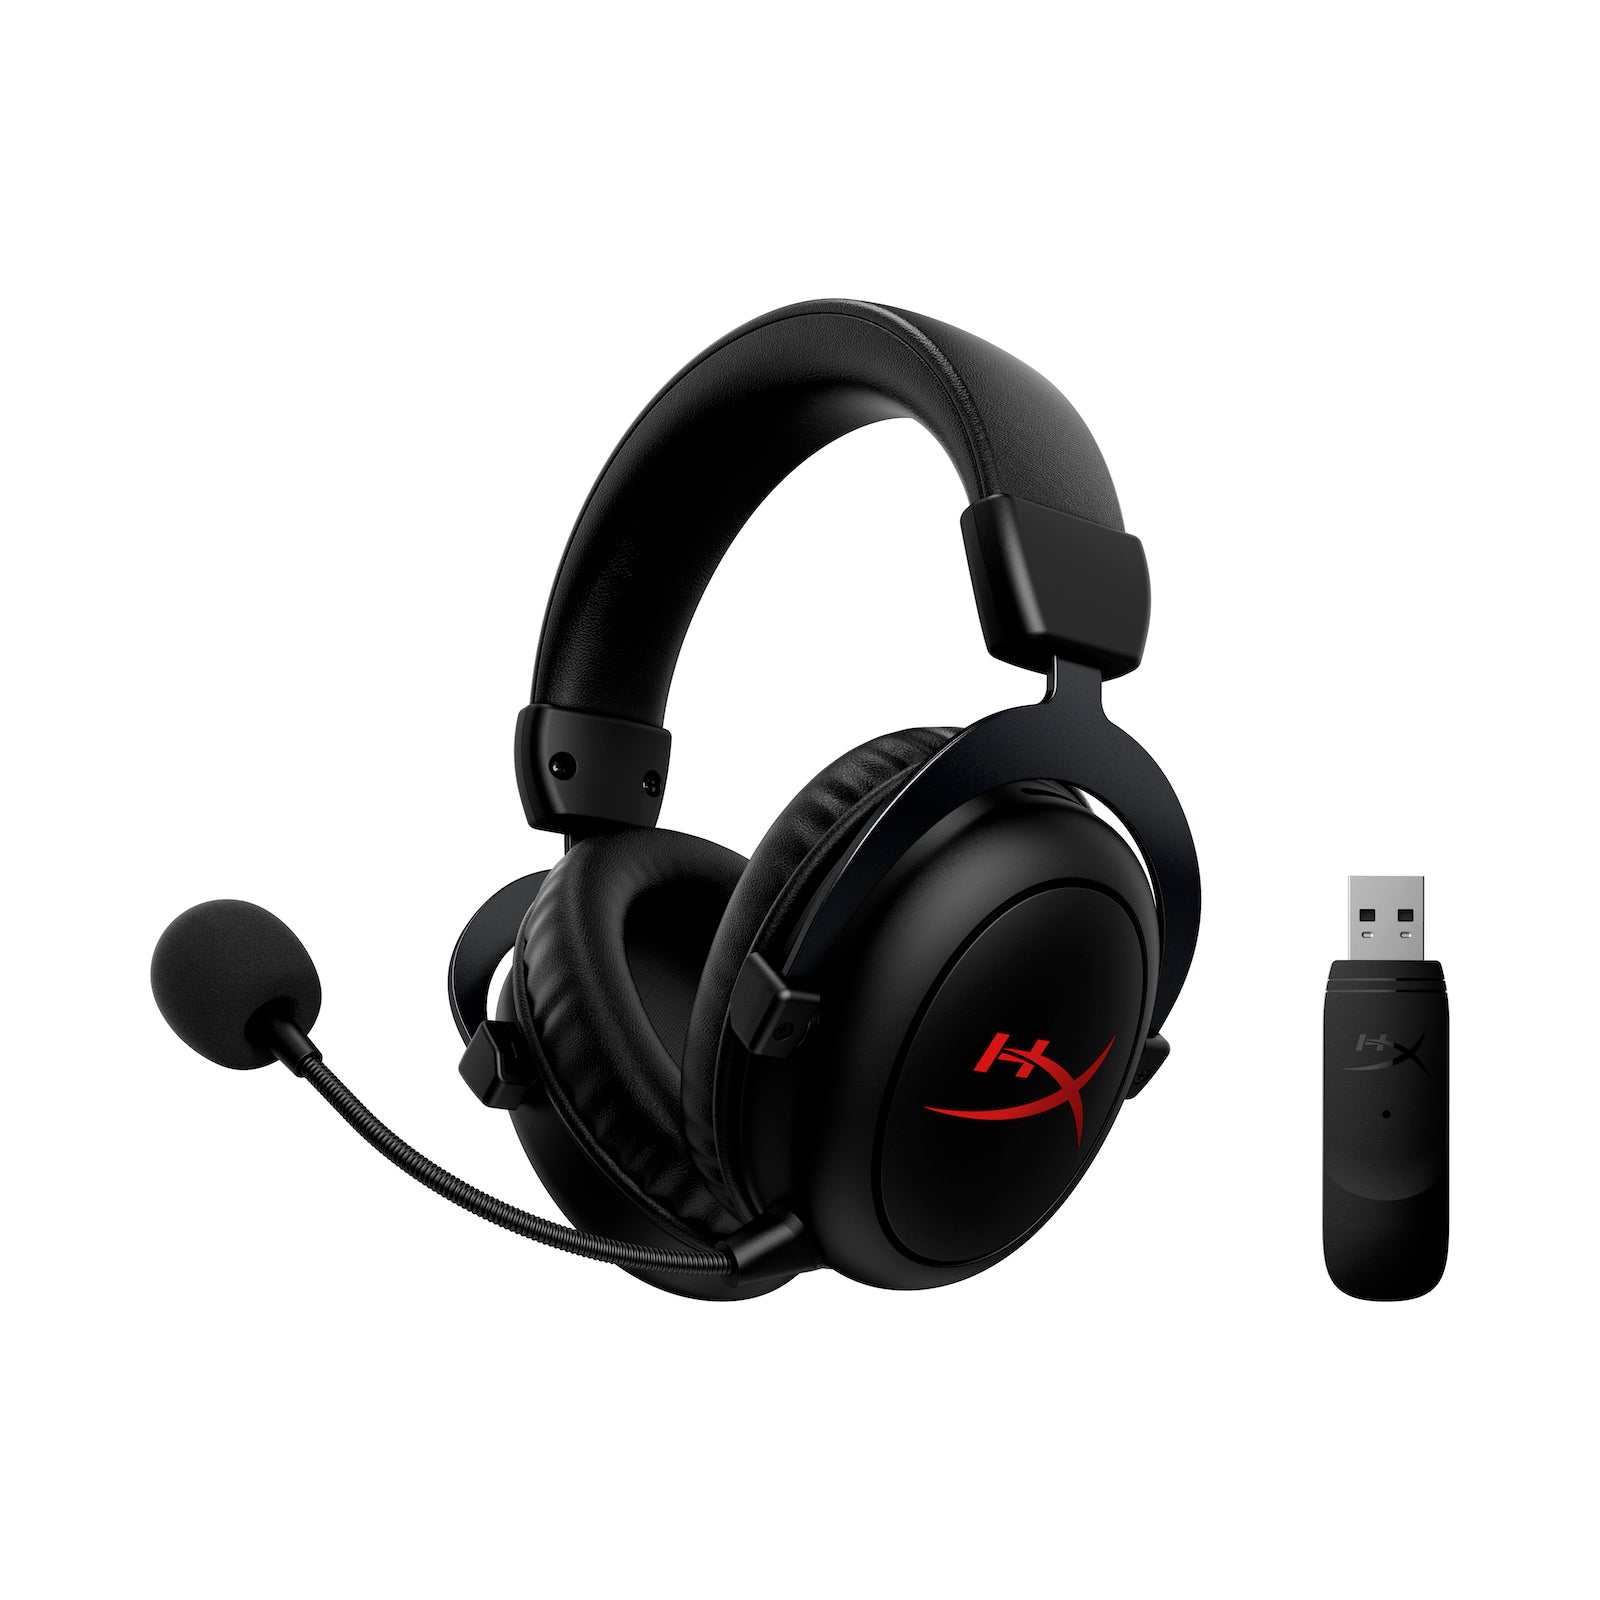 HyperX Launches Cloud Core Wireless Gaming Headset with DTS® Headphone:X®